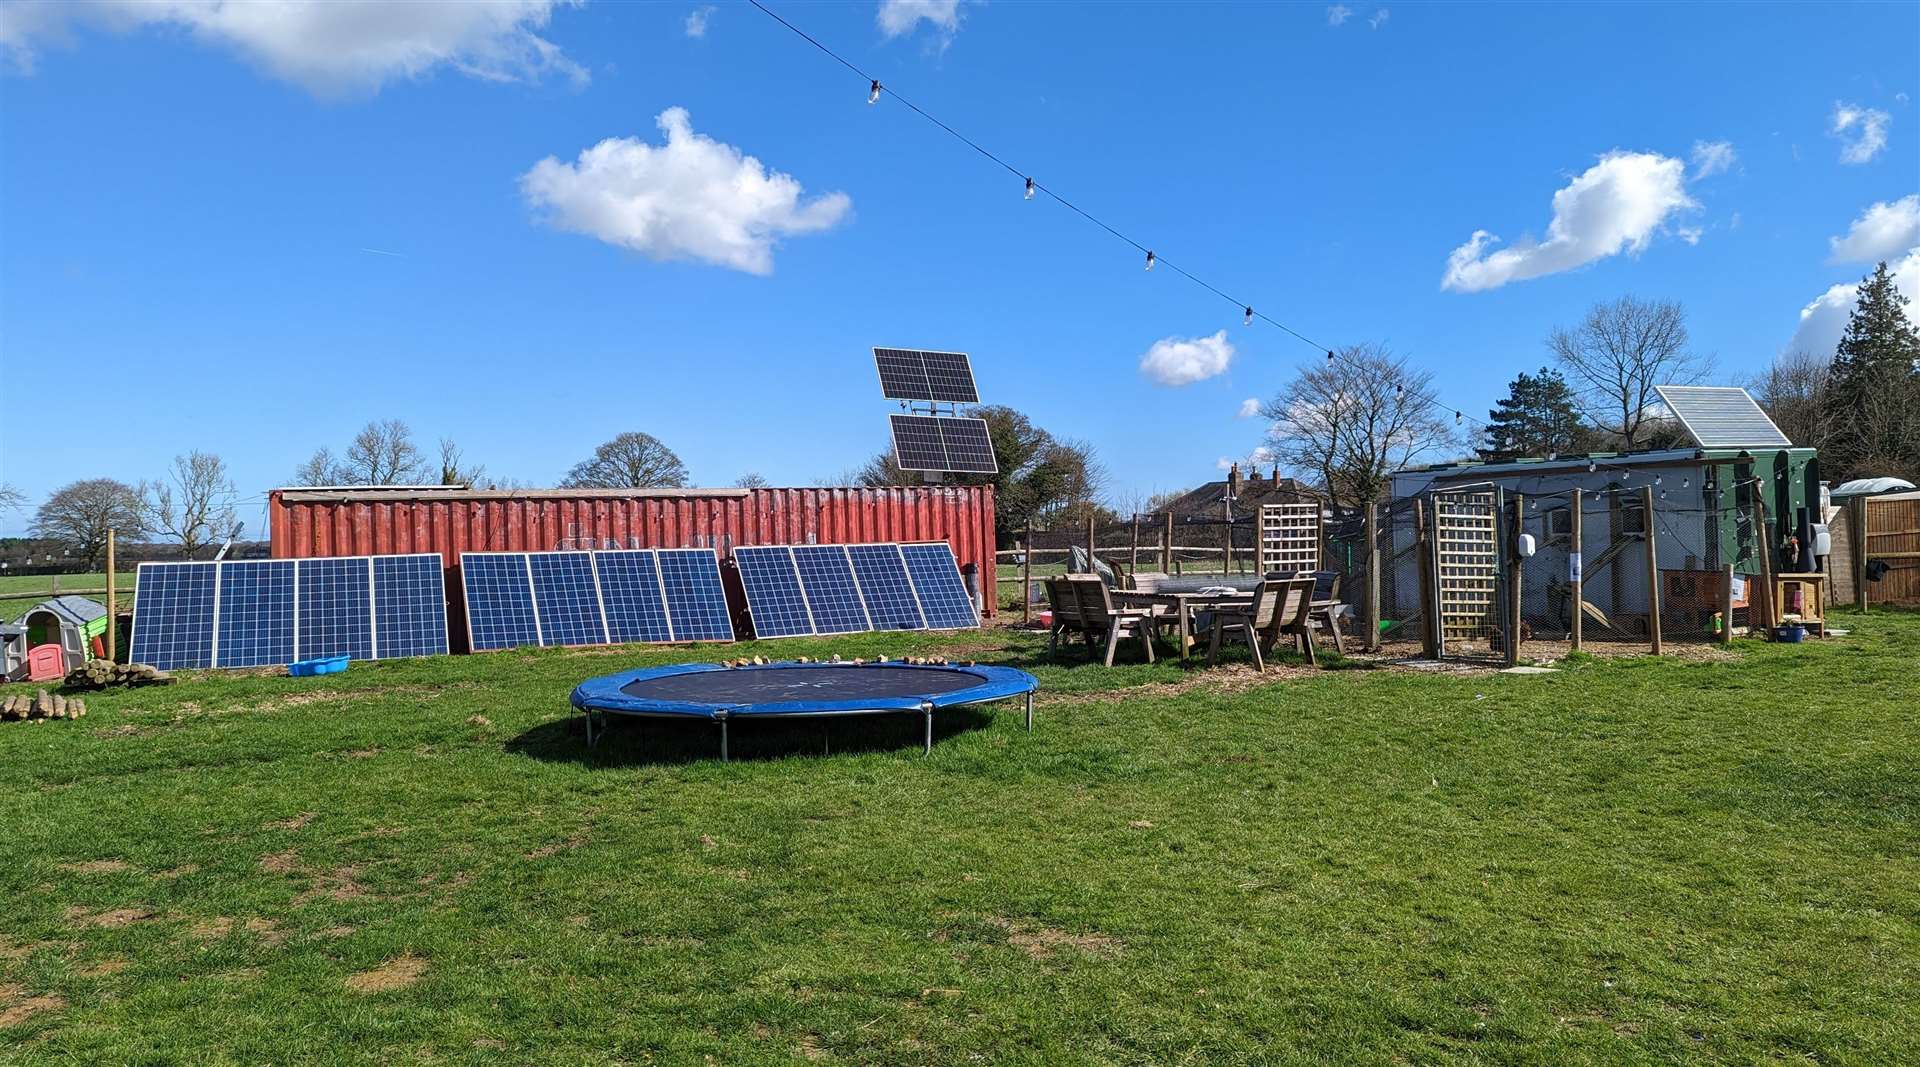 Solar panels are among the facilities the council wishes to see removed from the site